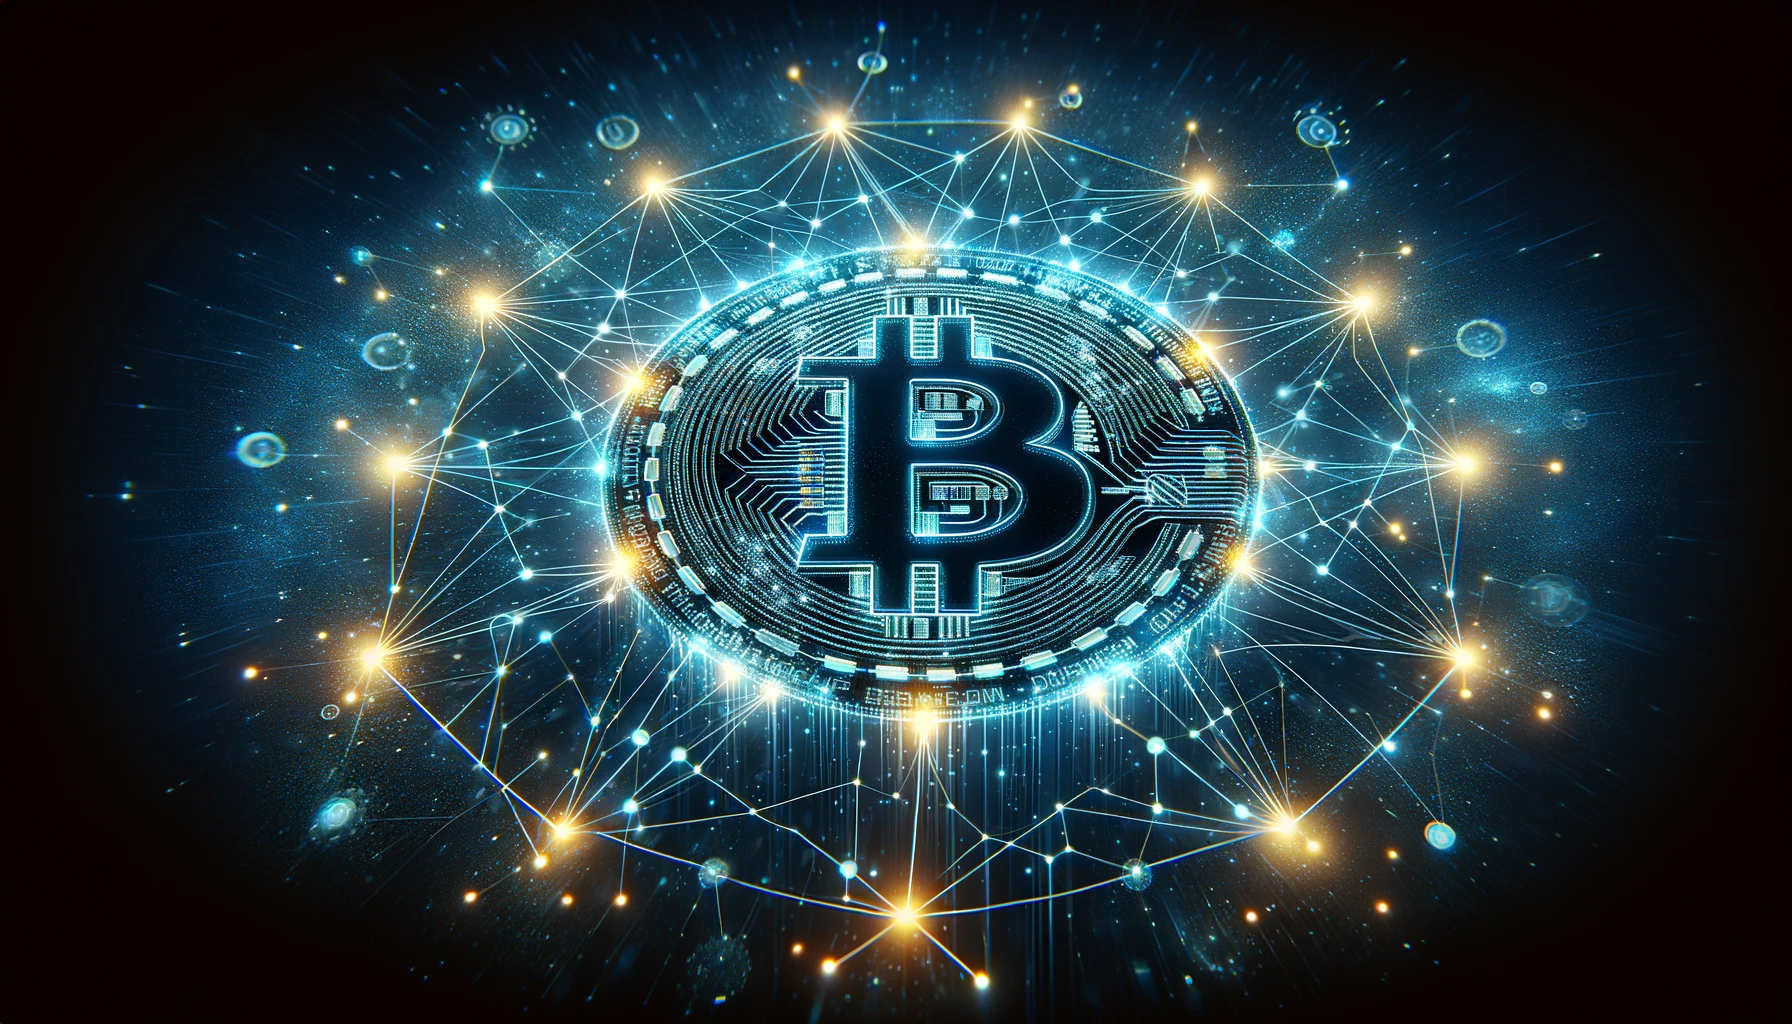 Cryptocurrency graphic with Bitcoin symbol and decentralized network